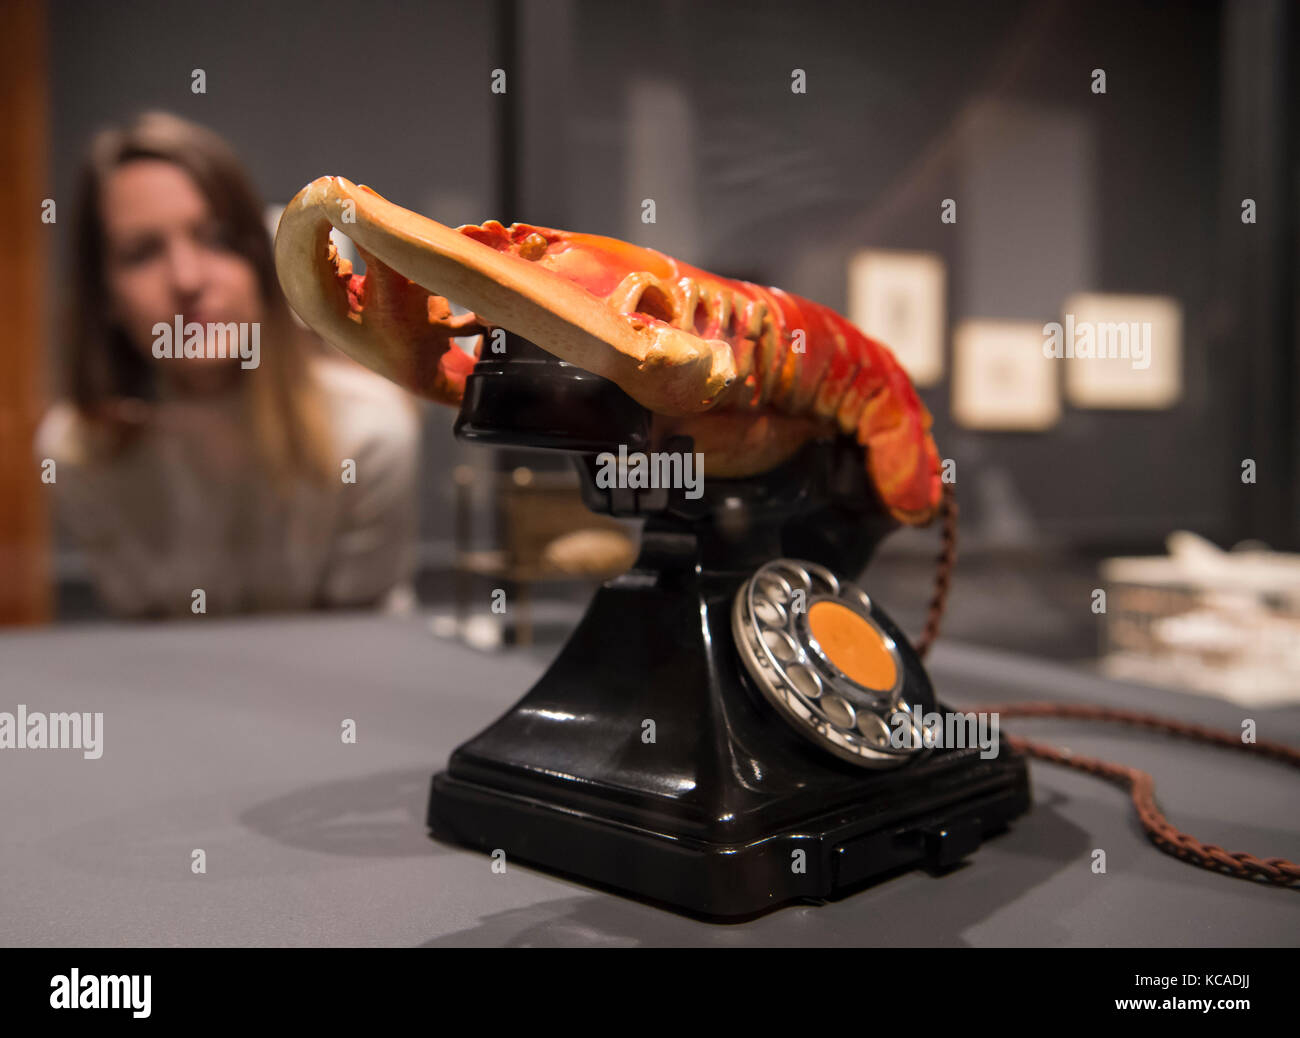 Royal Academy of Arts, London, UK. 3 October 2017. Two iconic works of the 20th century: Marcel Duchamp's Fountain, 1917/1964 and Salvador Dalí's Lobster Telephone, 1938 at the Royal Academy of Arts in an exhibition exploring the aesthetic and personal links between the two artists. The Dalí/Duchamp exhibition runs from 7 October 2017 - 3 January 2018. Dalí's Lobster Telephone, 1938 is on loan from West Dean College, West Sussex. Credit: Malcolm Park/Alamy Live News. Stock Photo